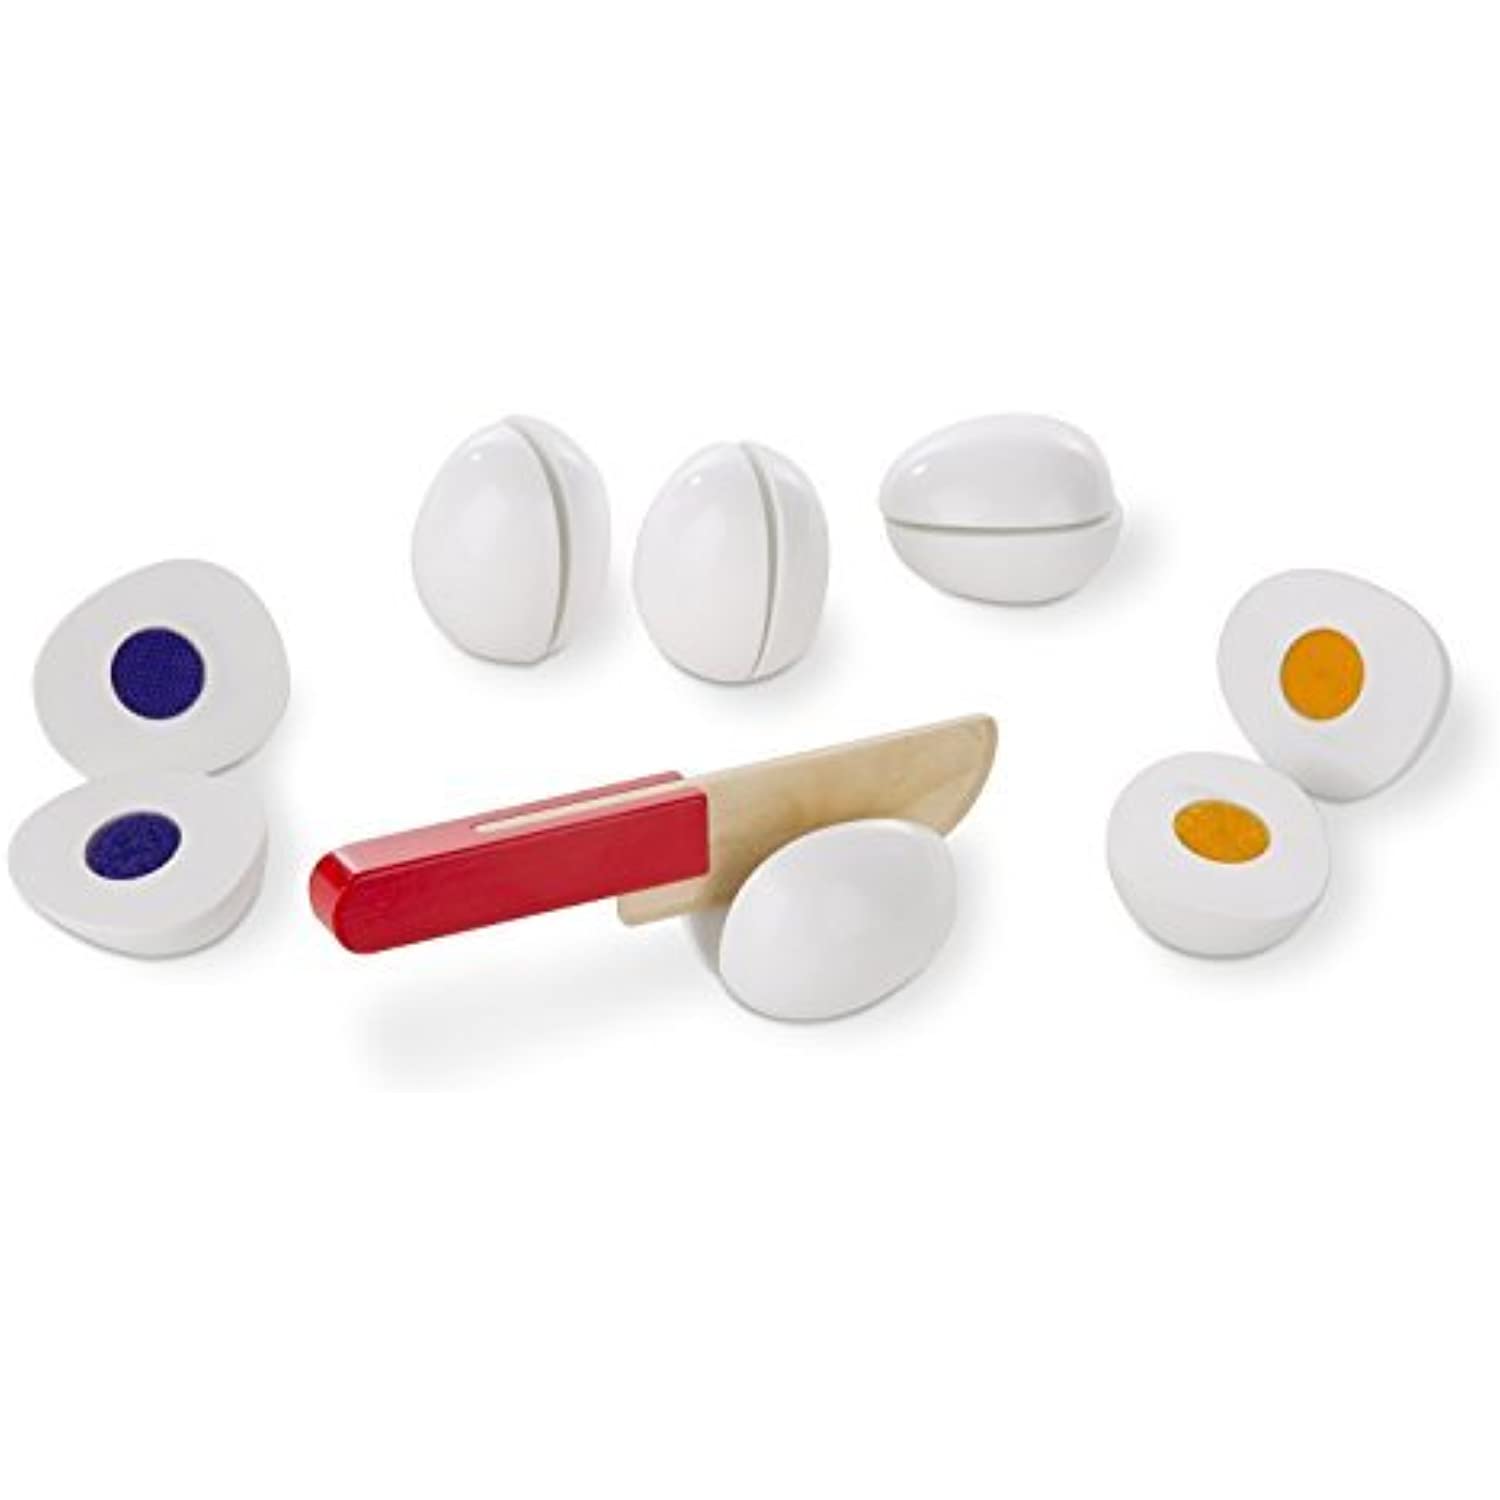 Melissa & Doug Bread and Butter Toast Set with Slice and Sort Egg Set – Wooden